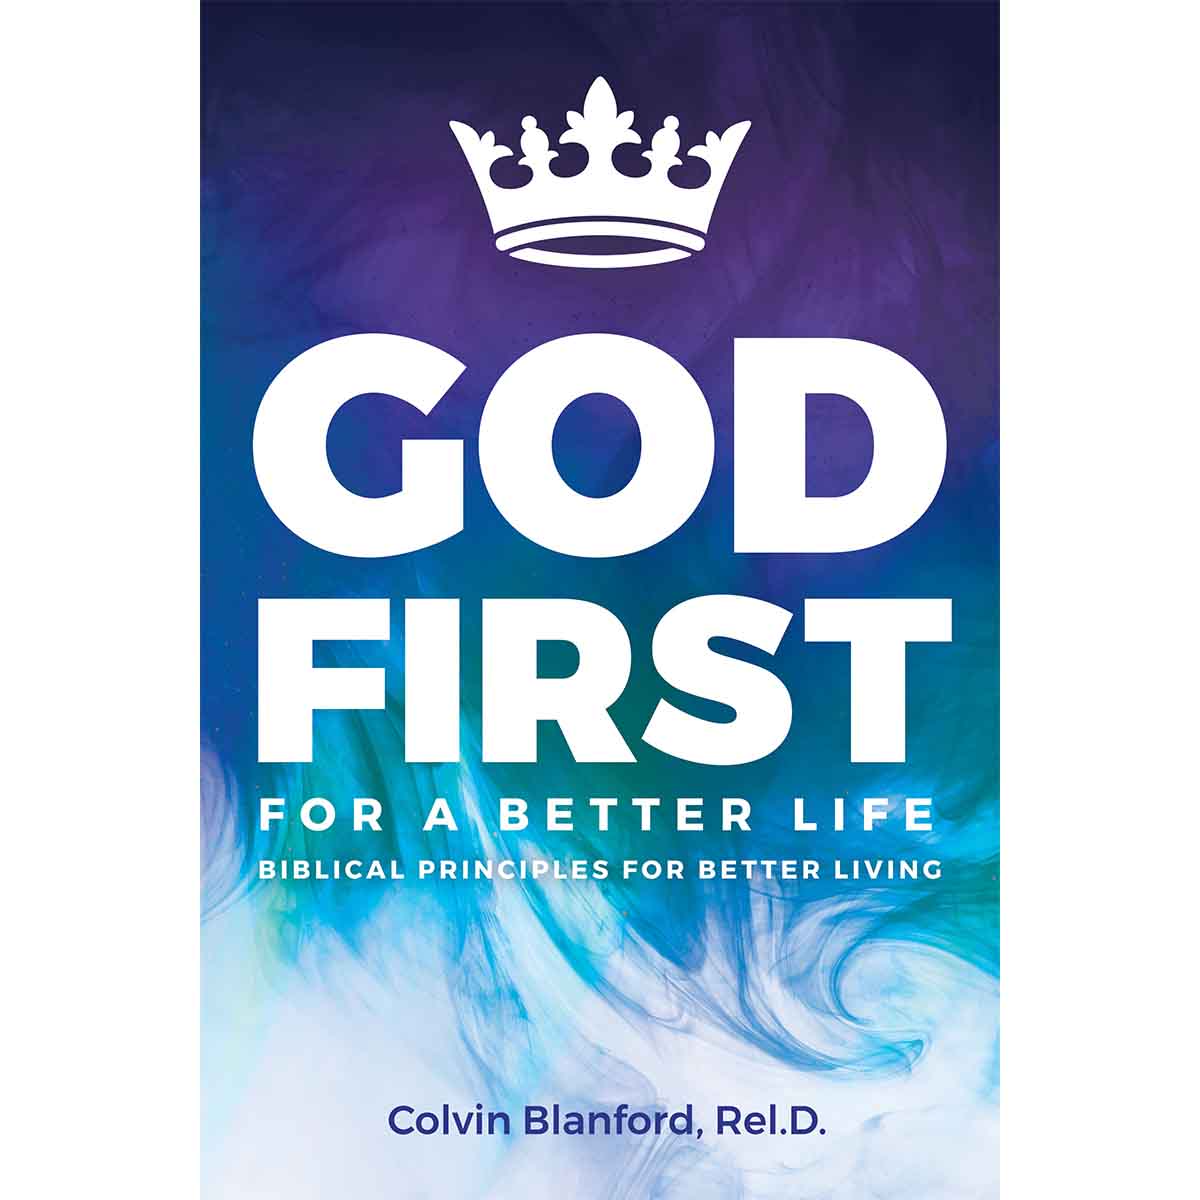 God First for a Better Life